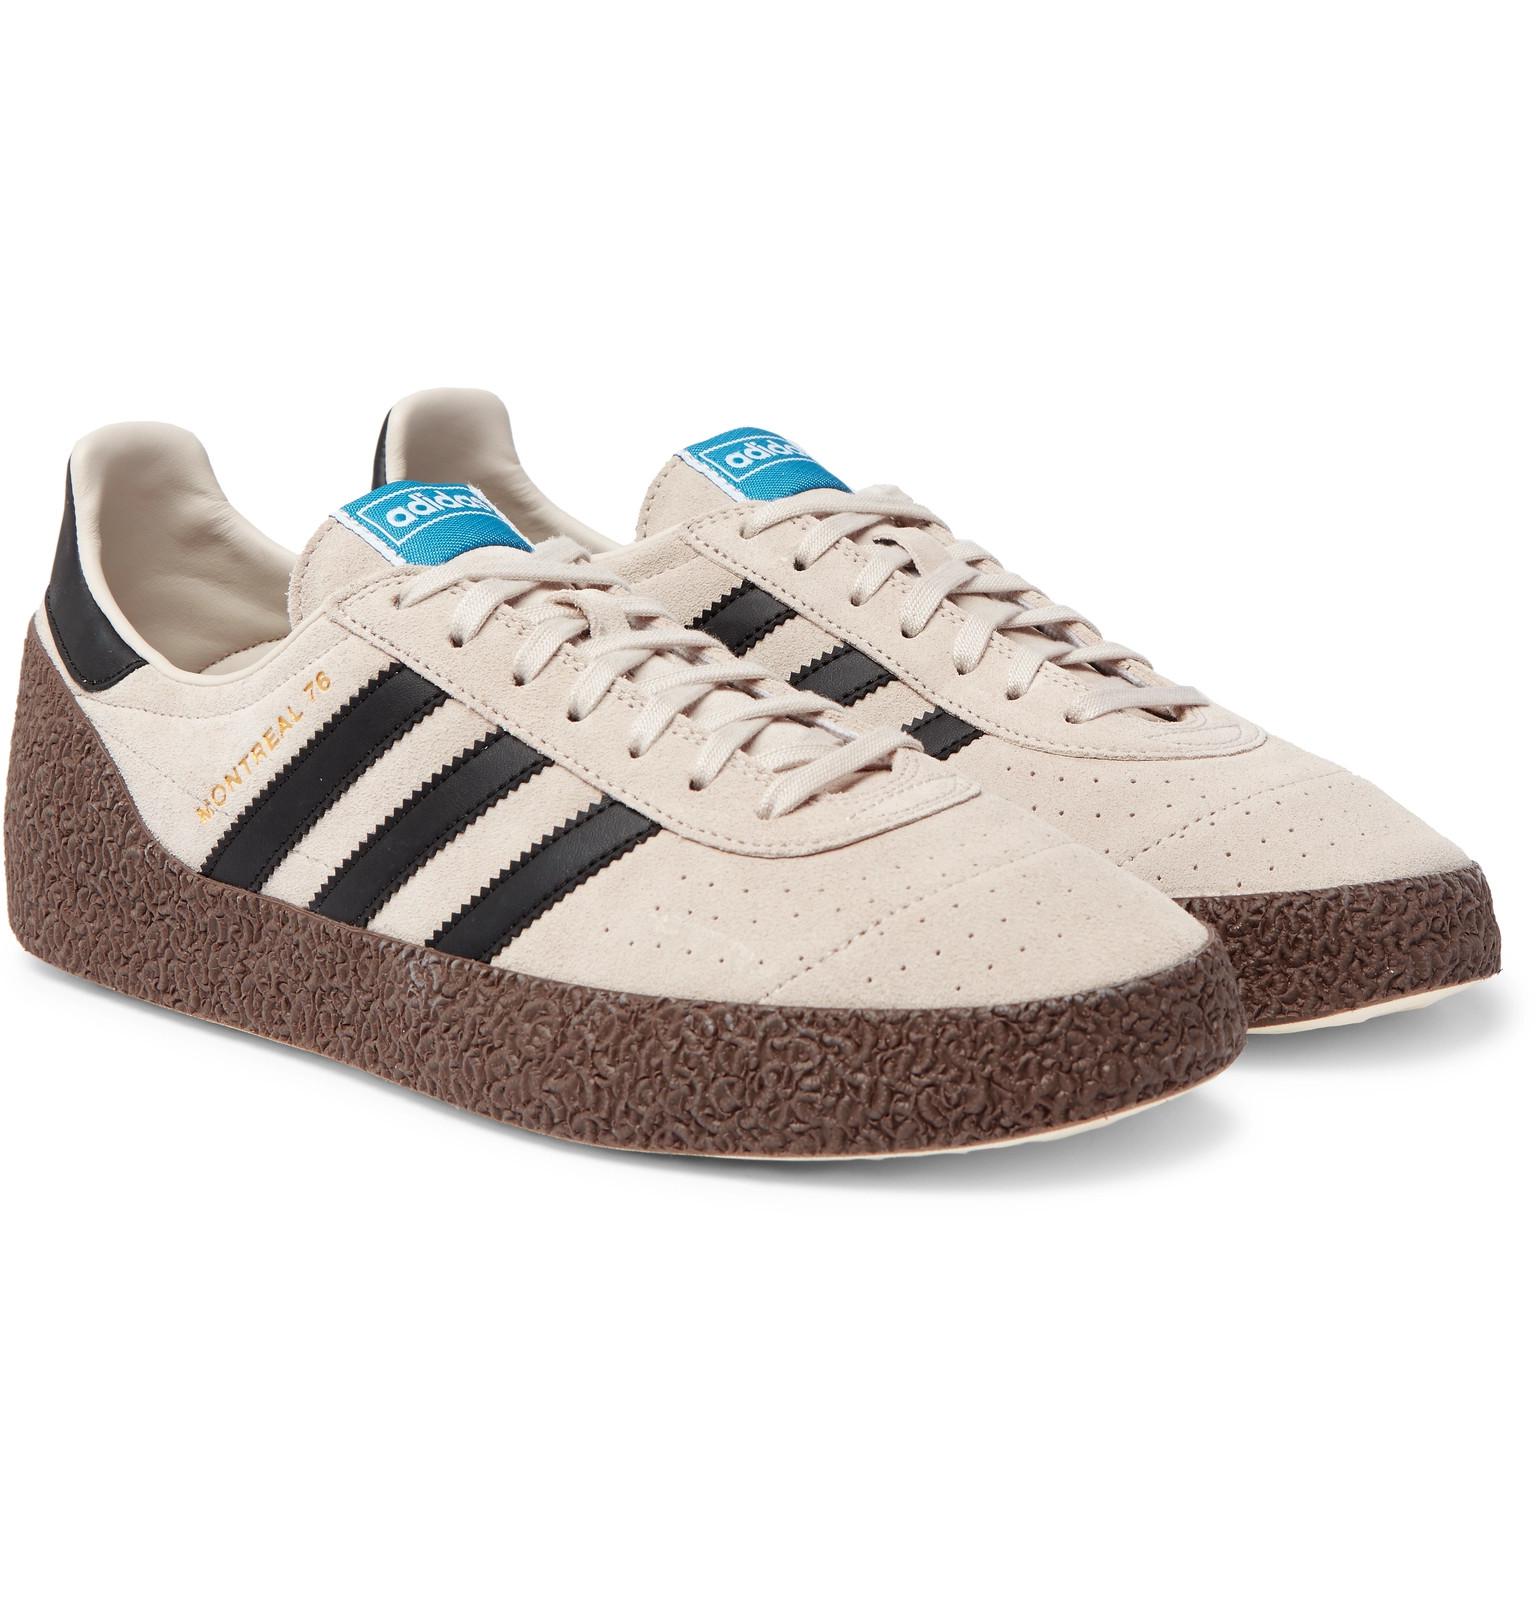 adidas Originals Montreal 76 Suede And Leather Sneakers in White for Men -  Lyst